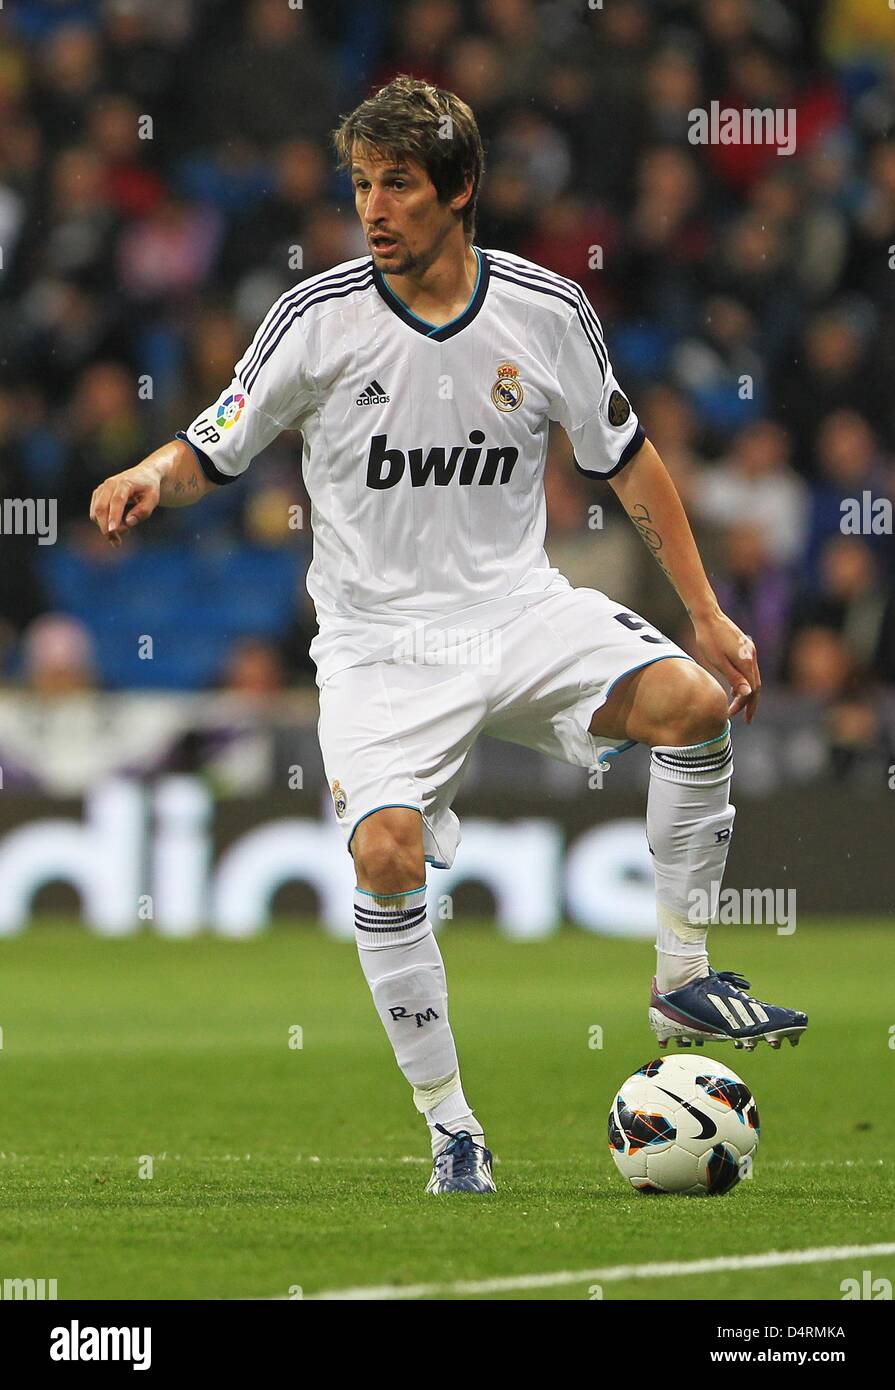 Real Madrid's Fabio Coentrao in action during the Spanish Primera Division soccer match between Real Madrid and RCD Mallorca at Santiago Bernabeu stadium in Madrid, Spain, 16 March 2013. Madrid won 5:2. Photo: Fabian Stratenschulte/dpa Stock Photo